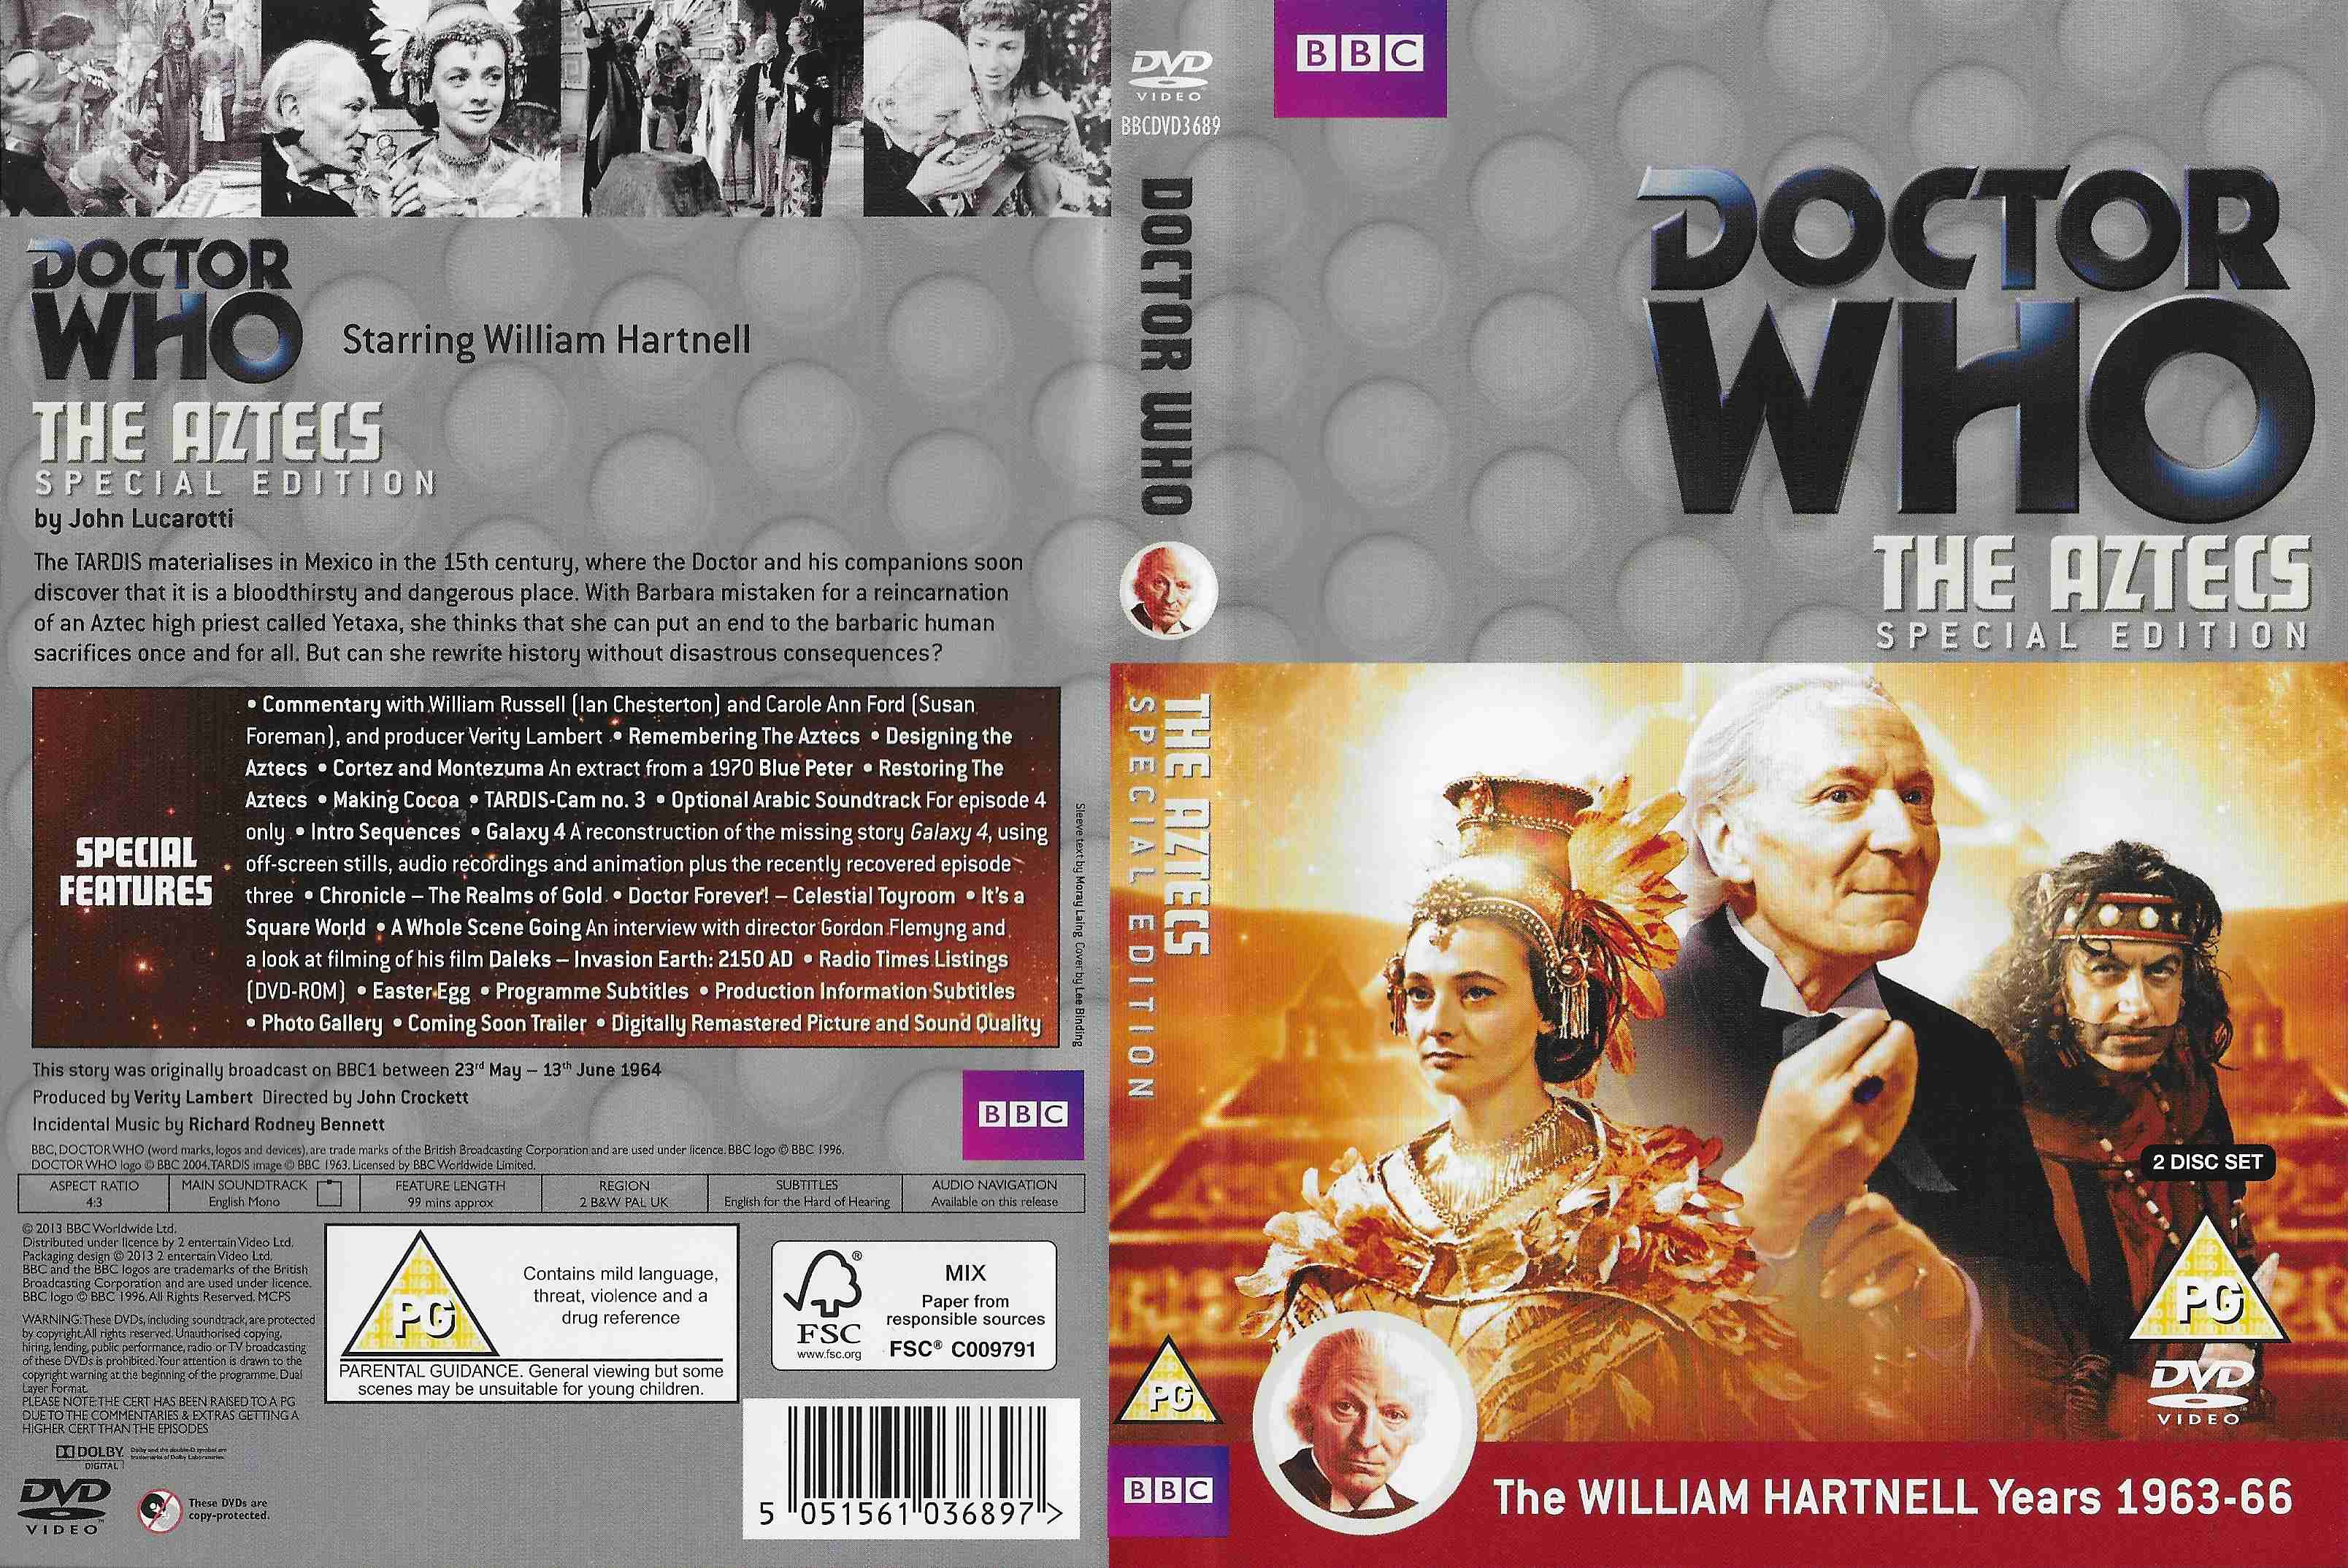 Picture of BBCDVD 3689 Doctor Who - The Aztecs by artist John Lucarotti from the BBC records and Tapes library